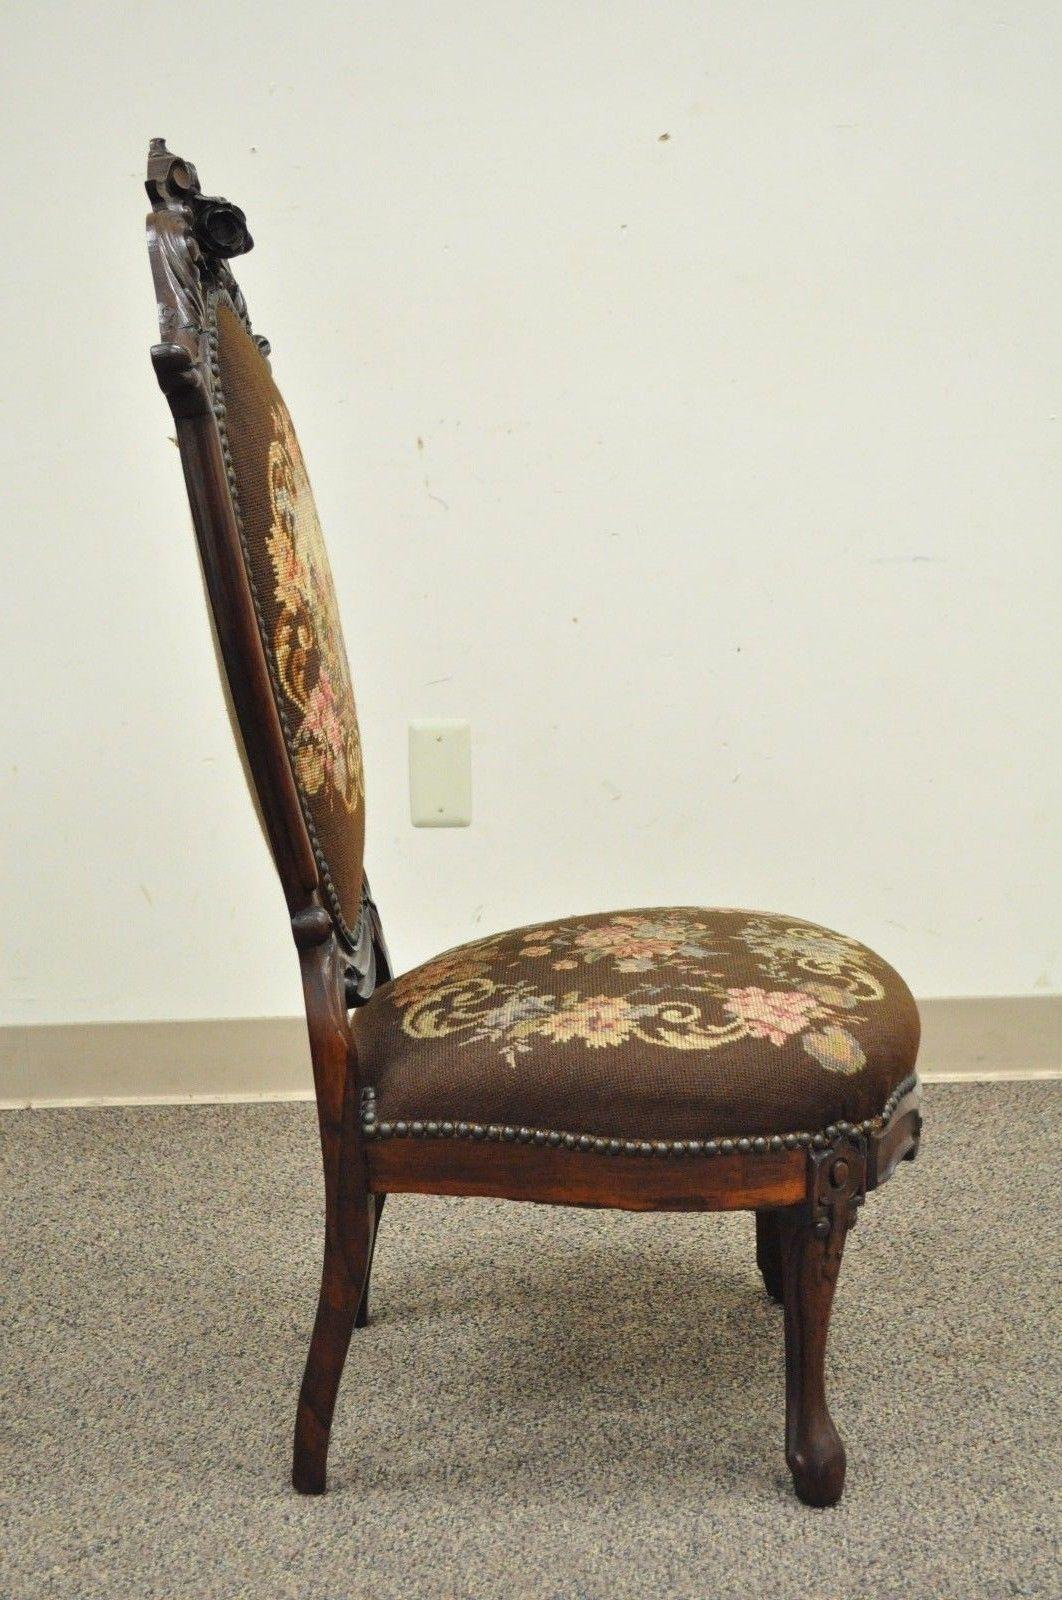 American Antique Victorian Finely Carved Rosewood Needlepoint Prie Dieu Accent Side Chair